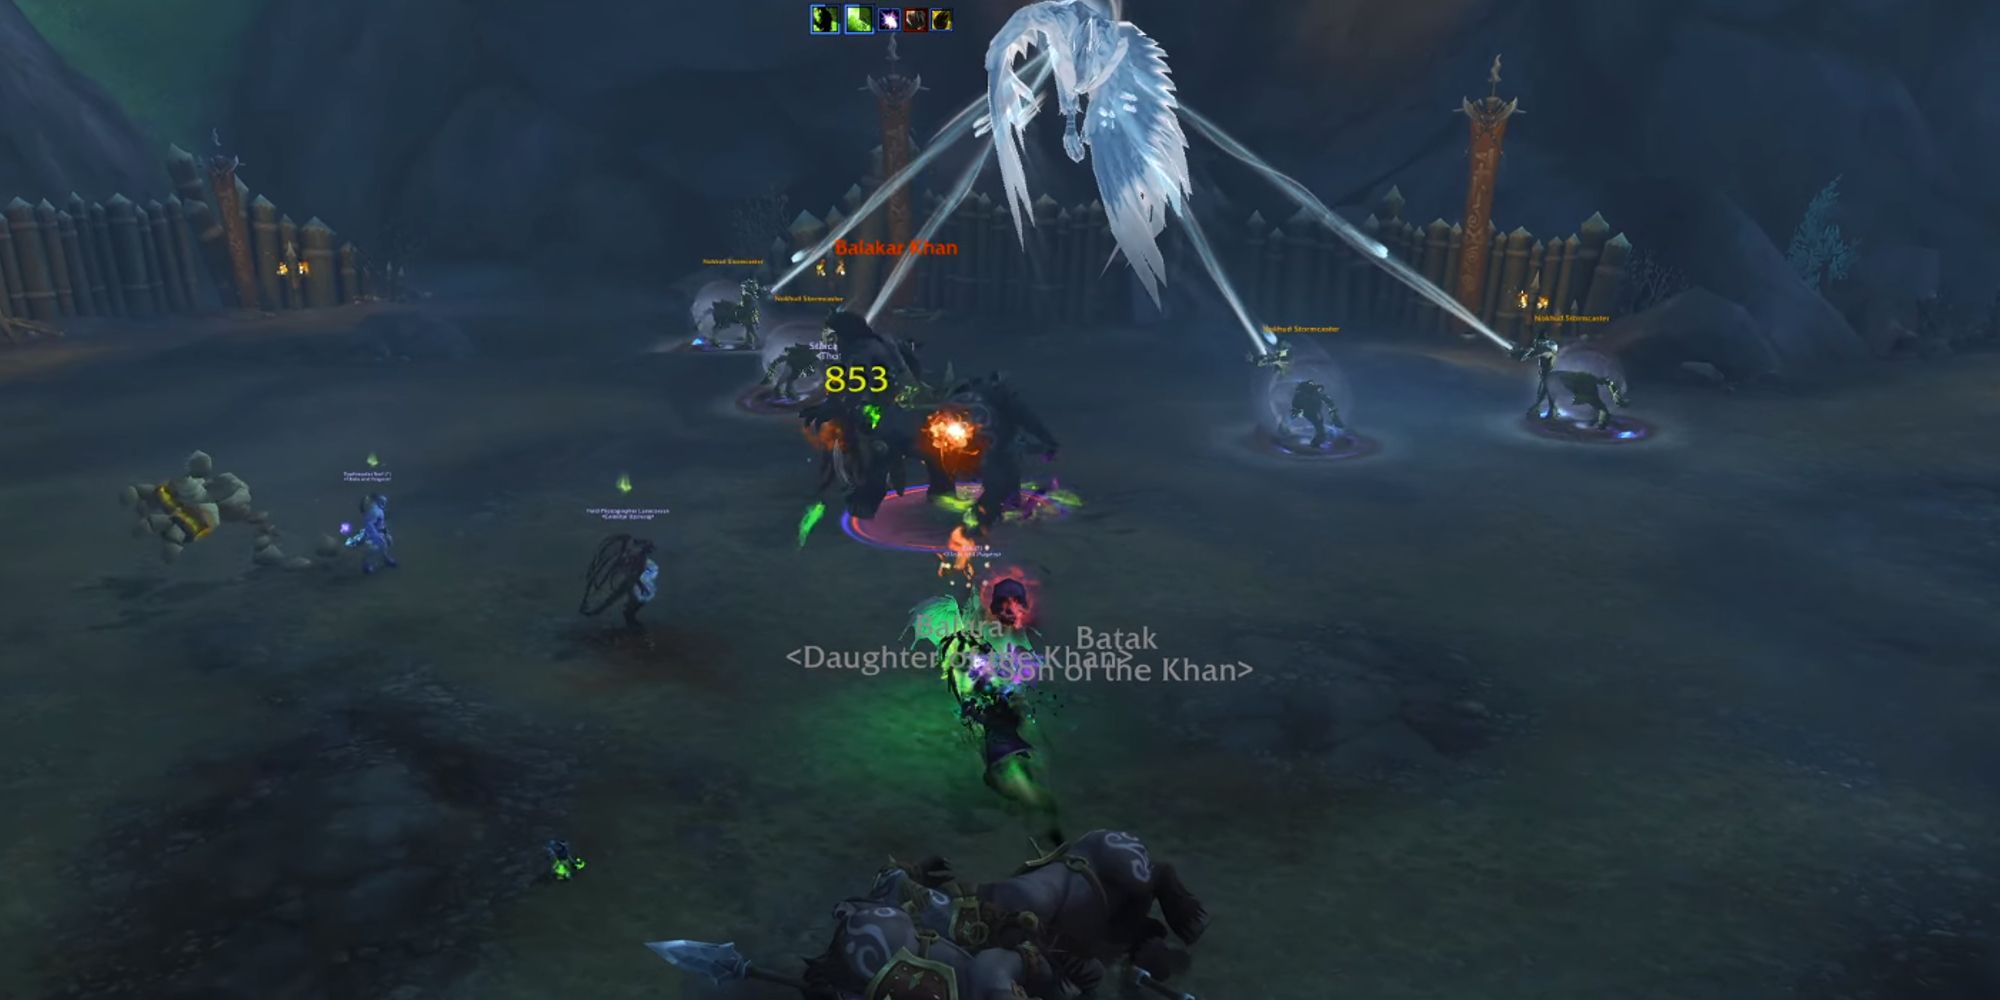 A group fight Balakar Khan in the Nokhud Offensive Dungeon in World of Warcraft Dragonblight